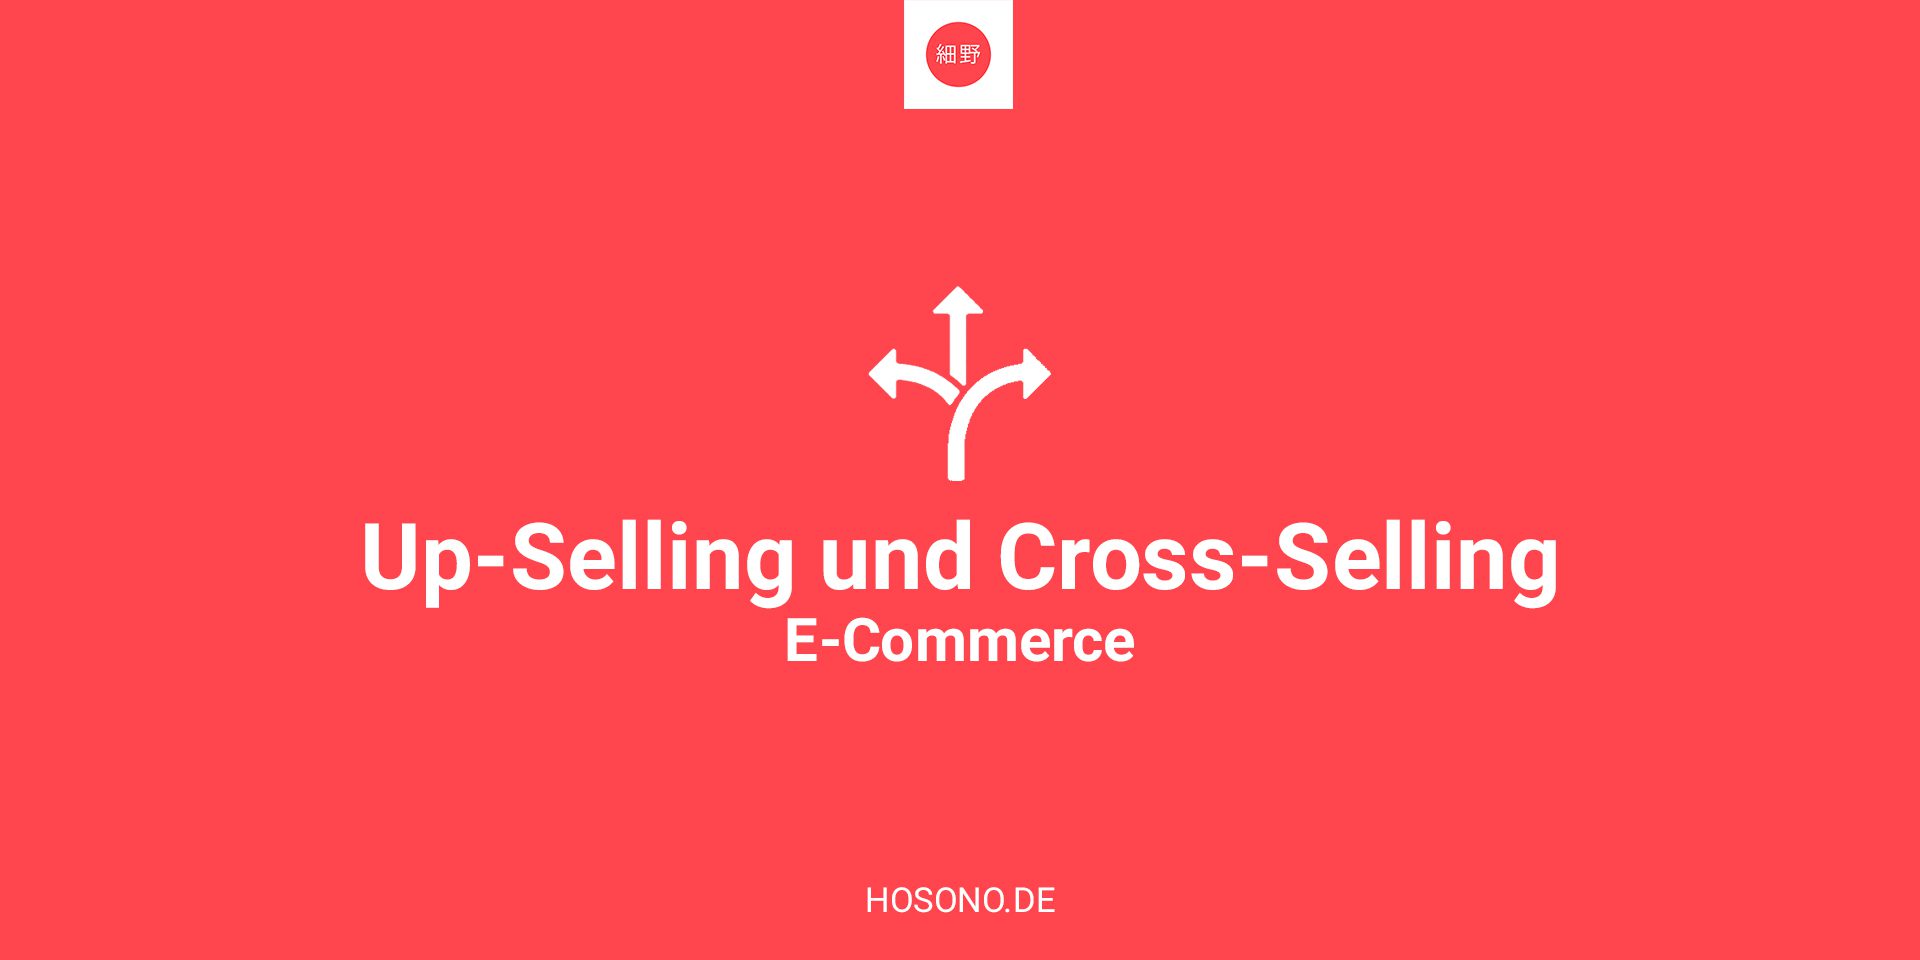 Up-Selling und Cross-Selling